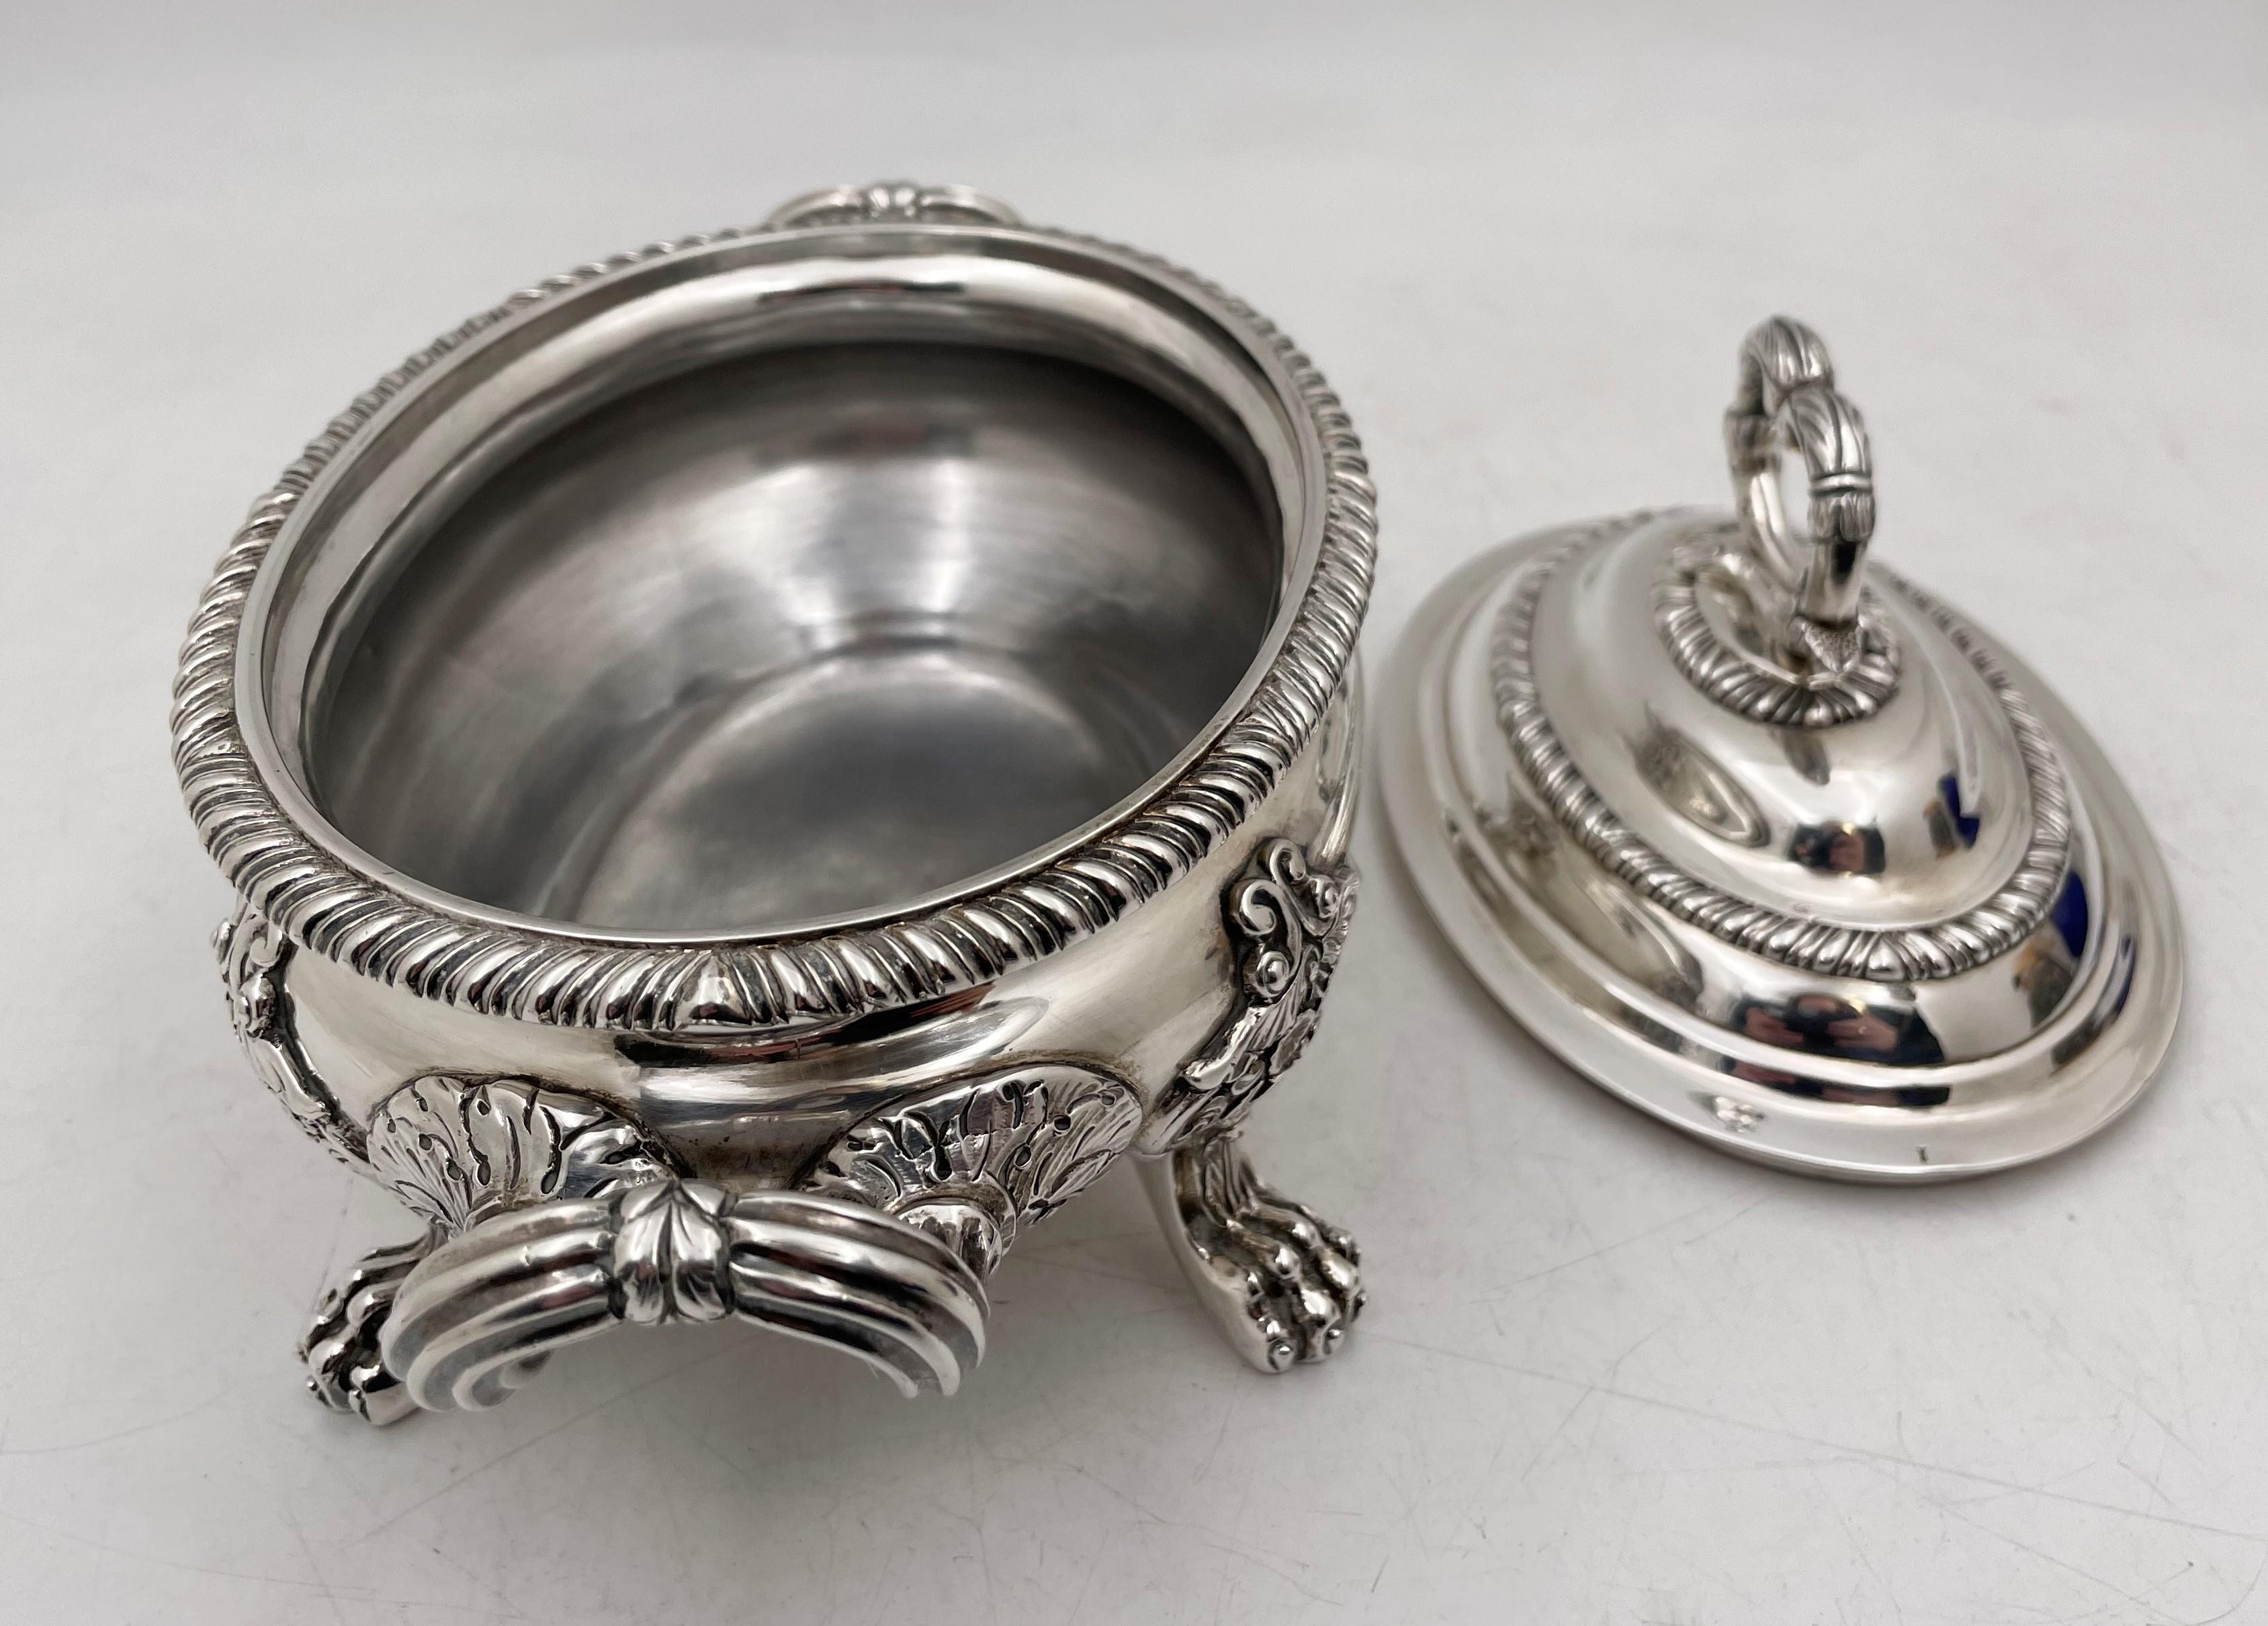 William brown, English sterling silver tureen or covered bowl from 1824 in Georgian style, with a heavy gage, standing on 4 legs realistically modeled after lion's claws, showcasing exquisite, stylized motifs. It measures 8 3/8'' from handle to